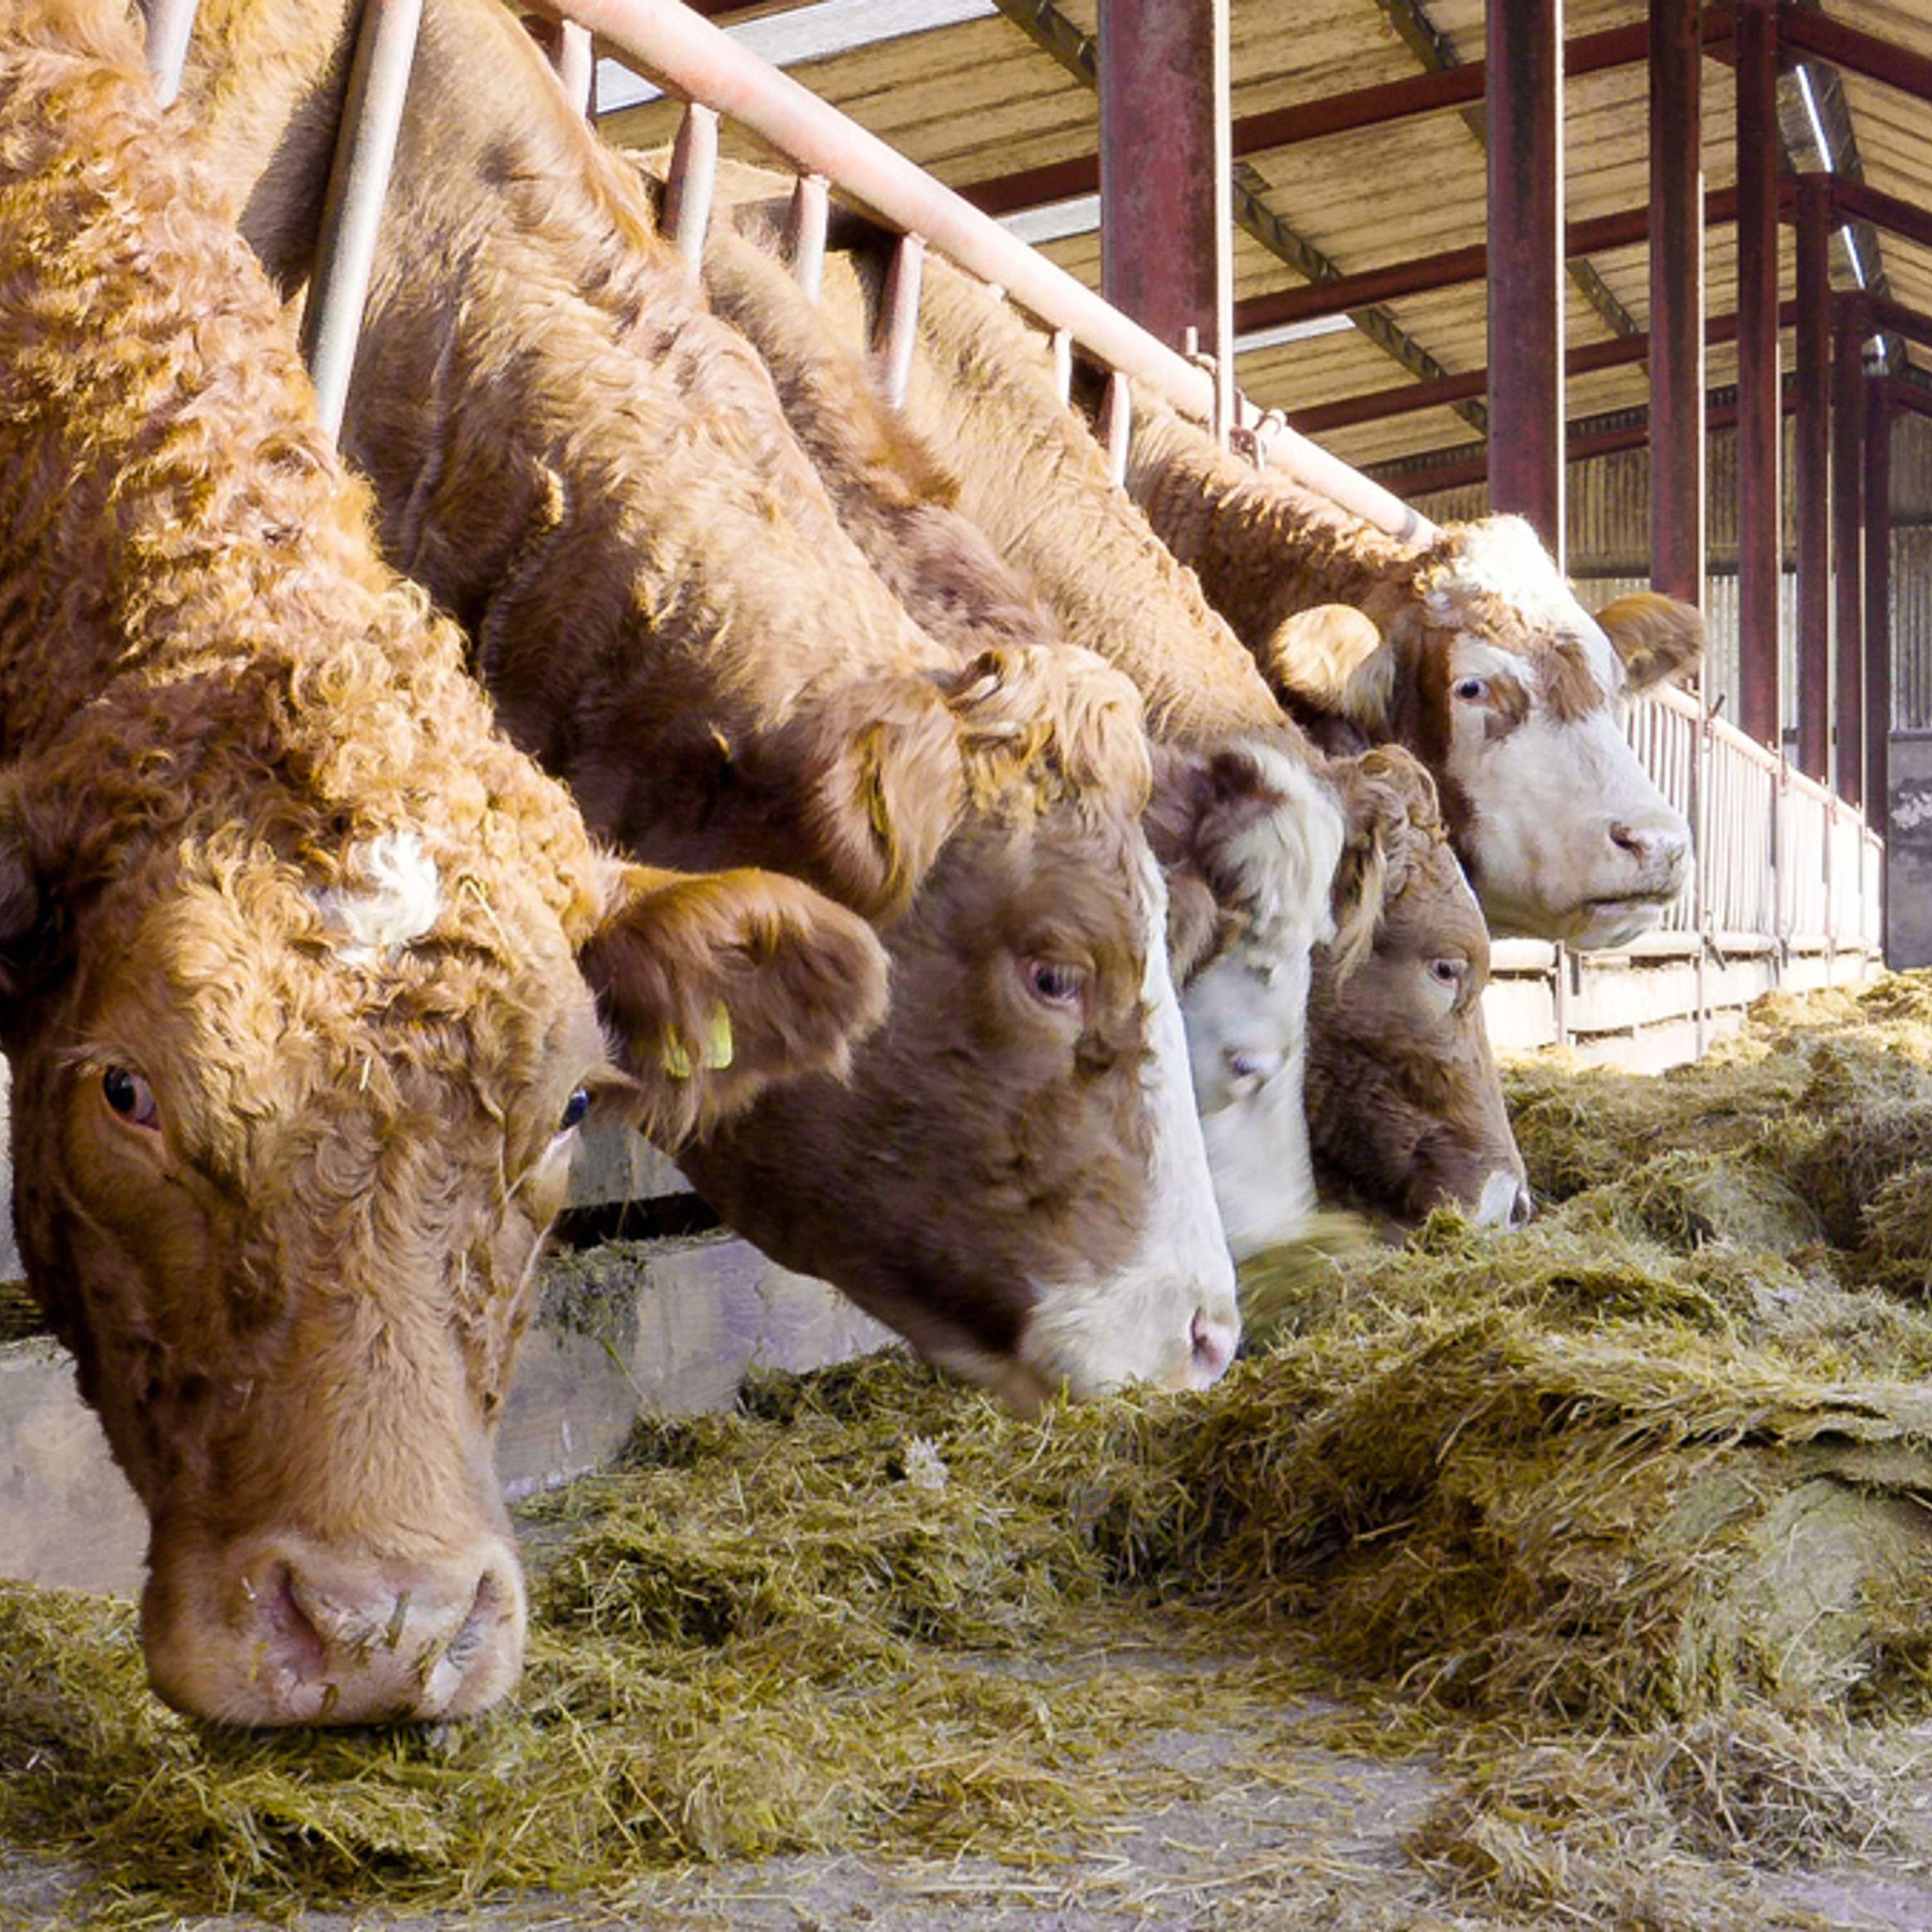 What should I be looking for in a pre-calving mineral?